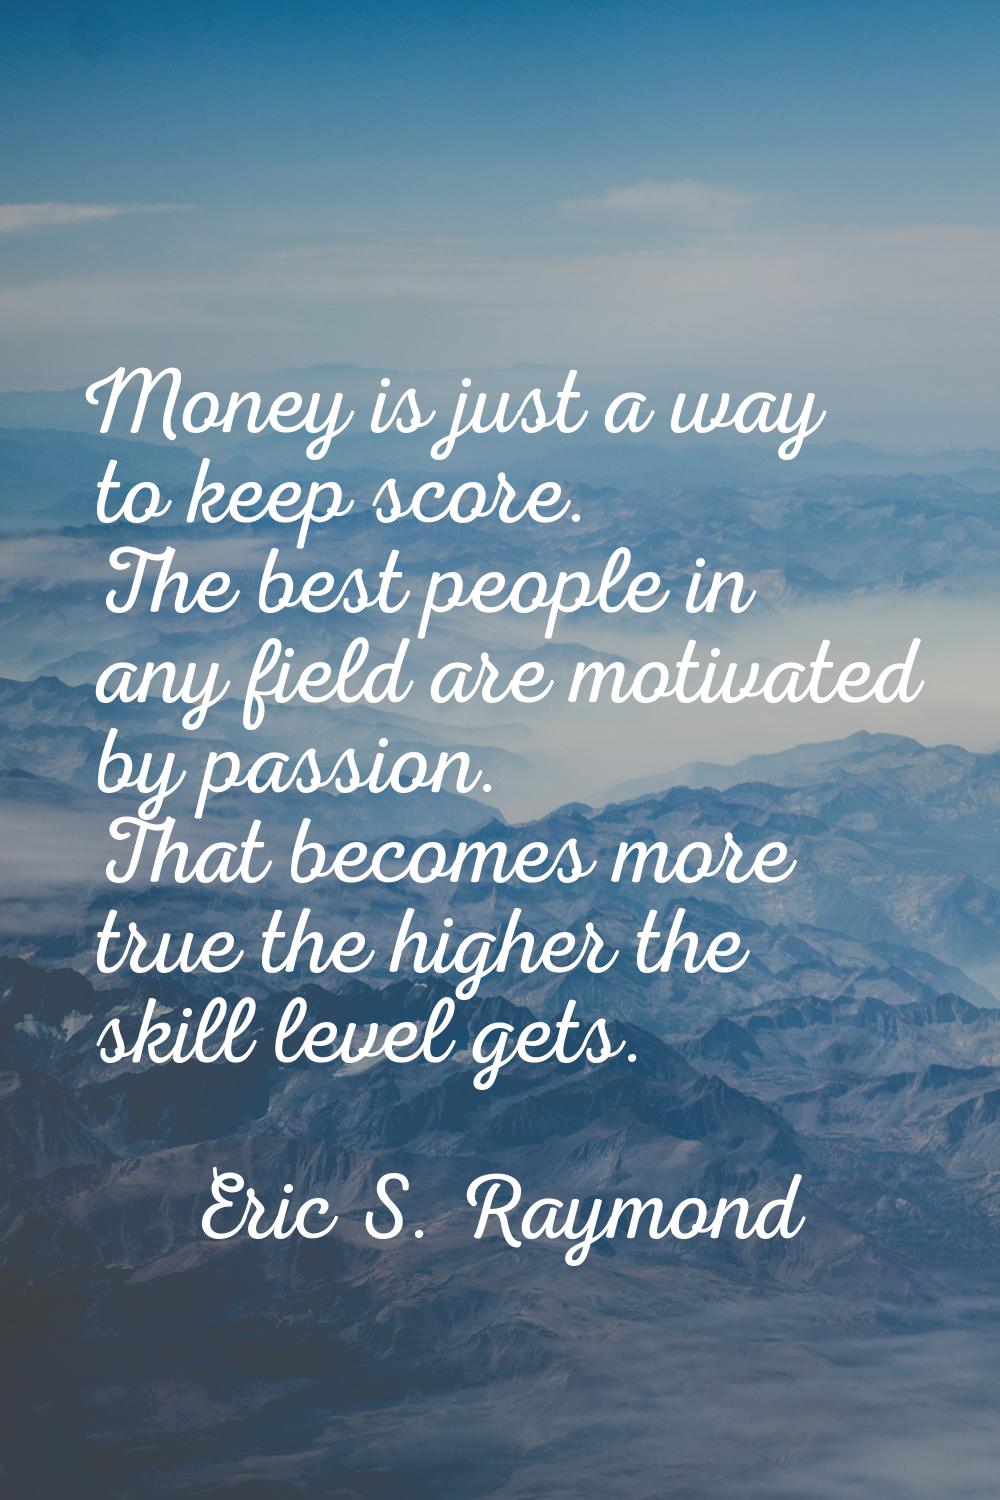 Money is just a way to keep score. The best people in any field are motivated by passion. That beco